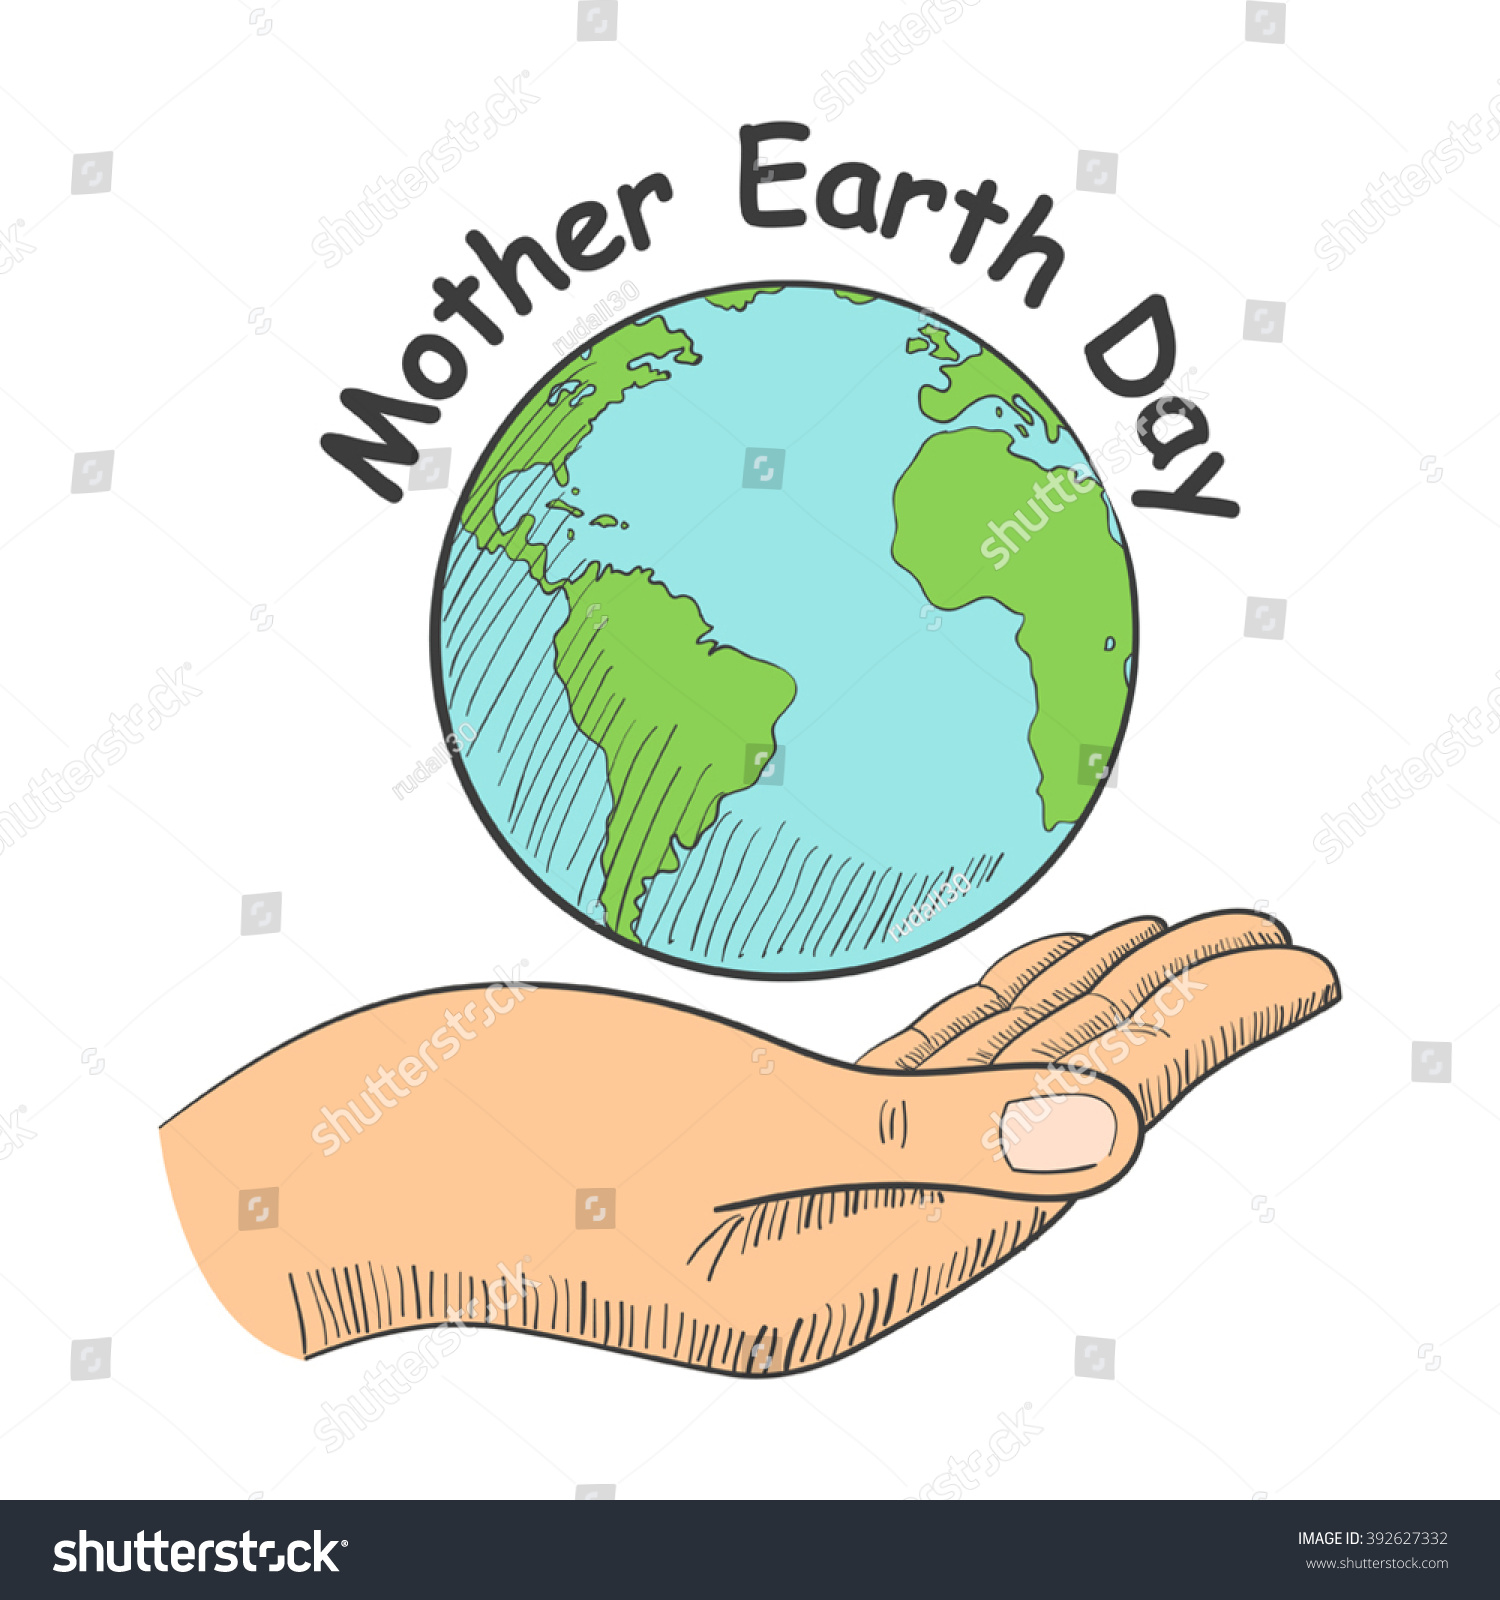 mother earth clip art free - photo #20